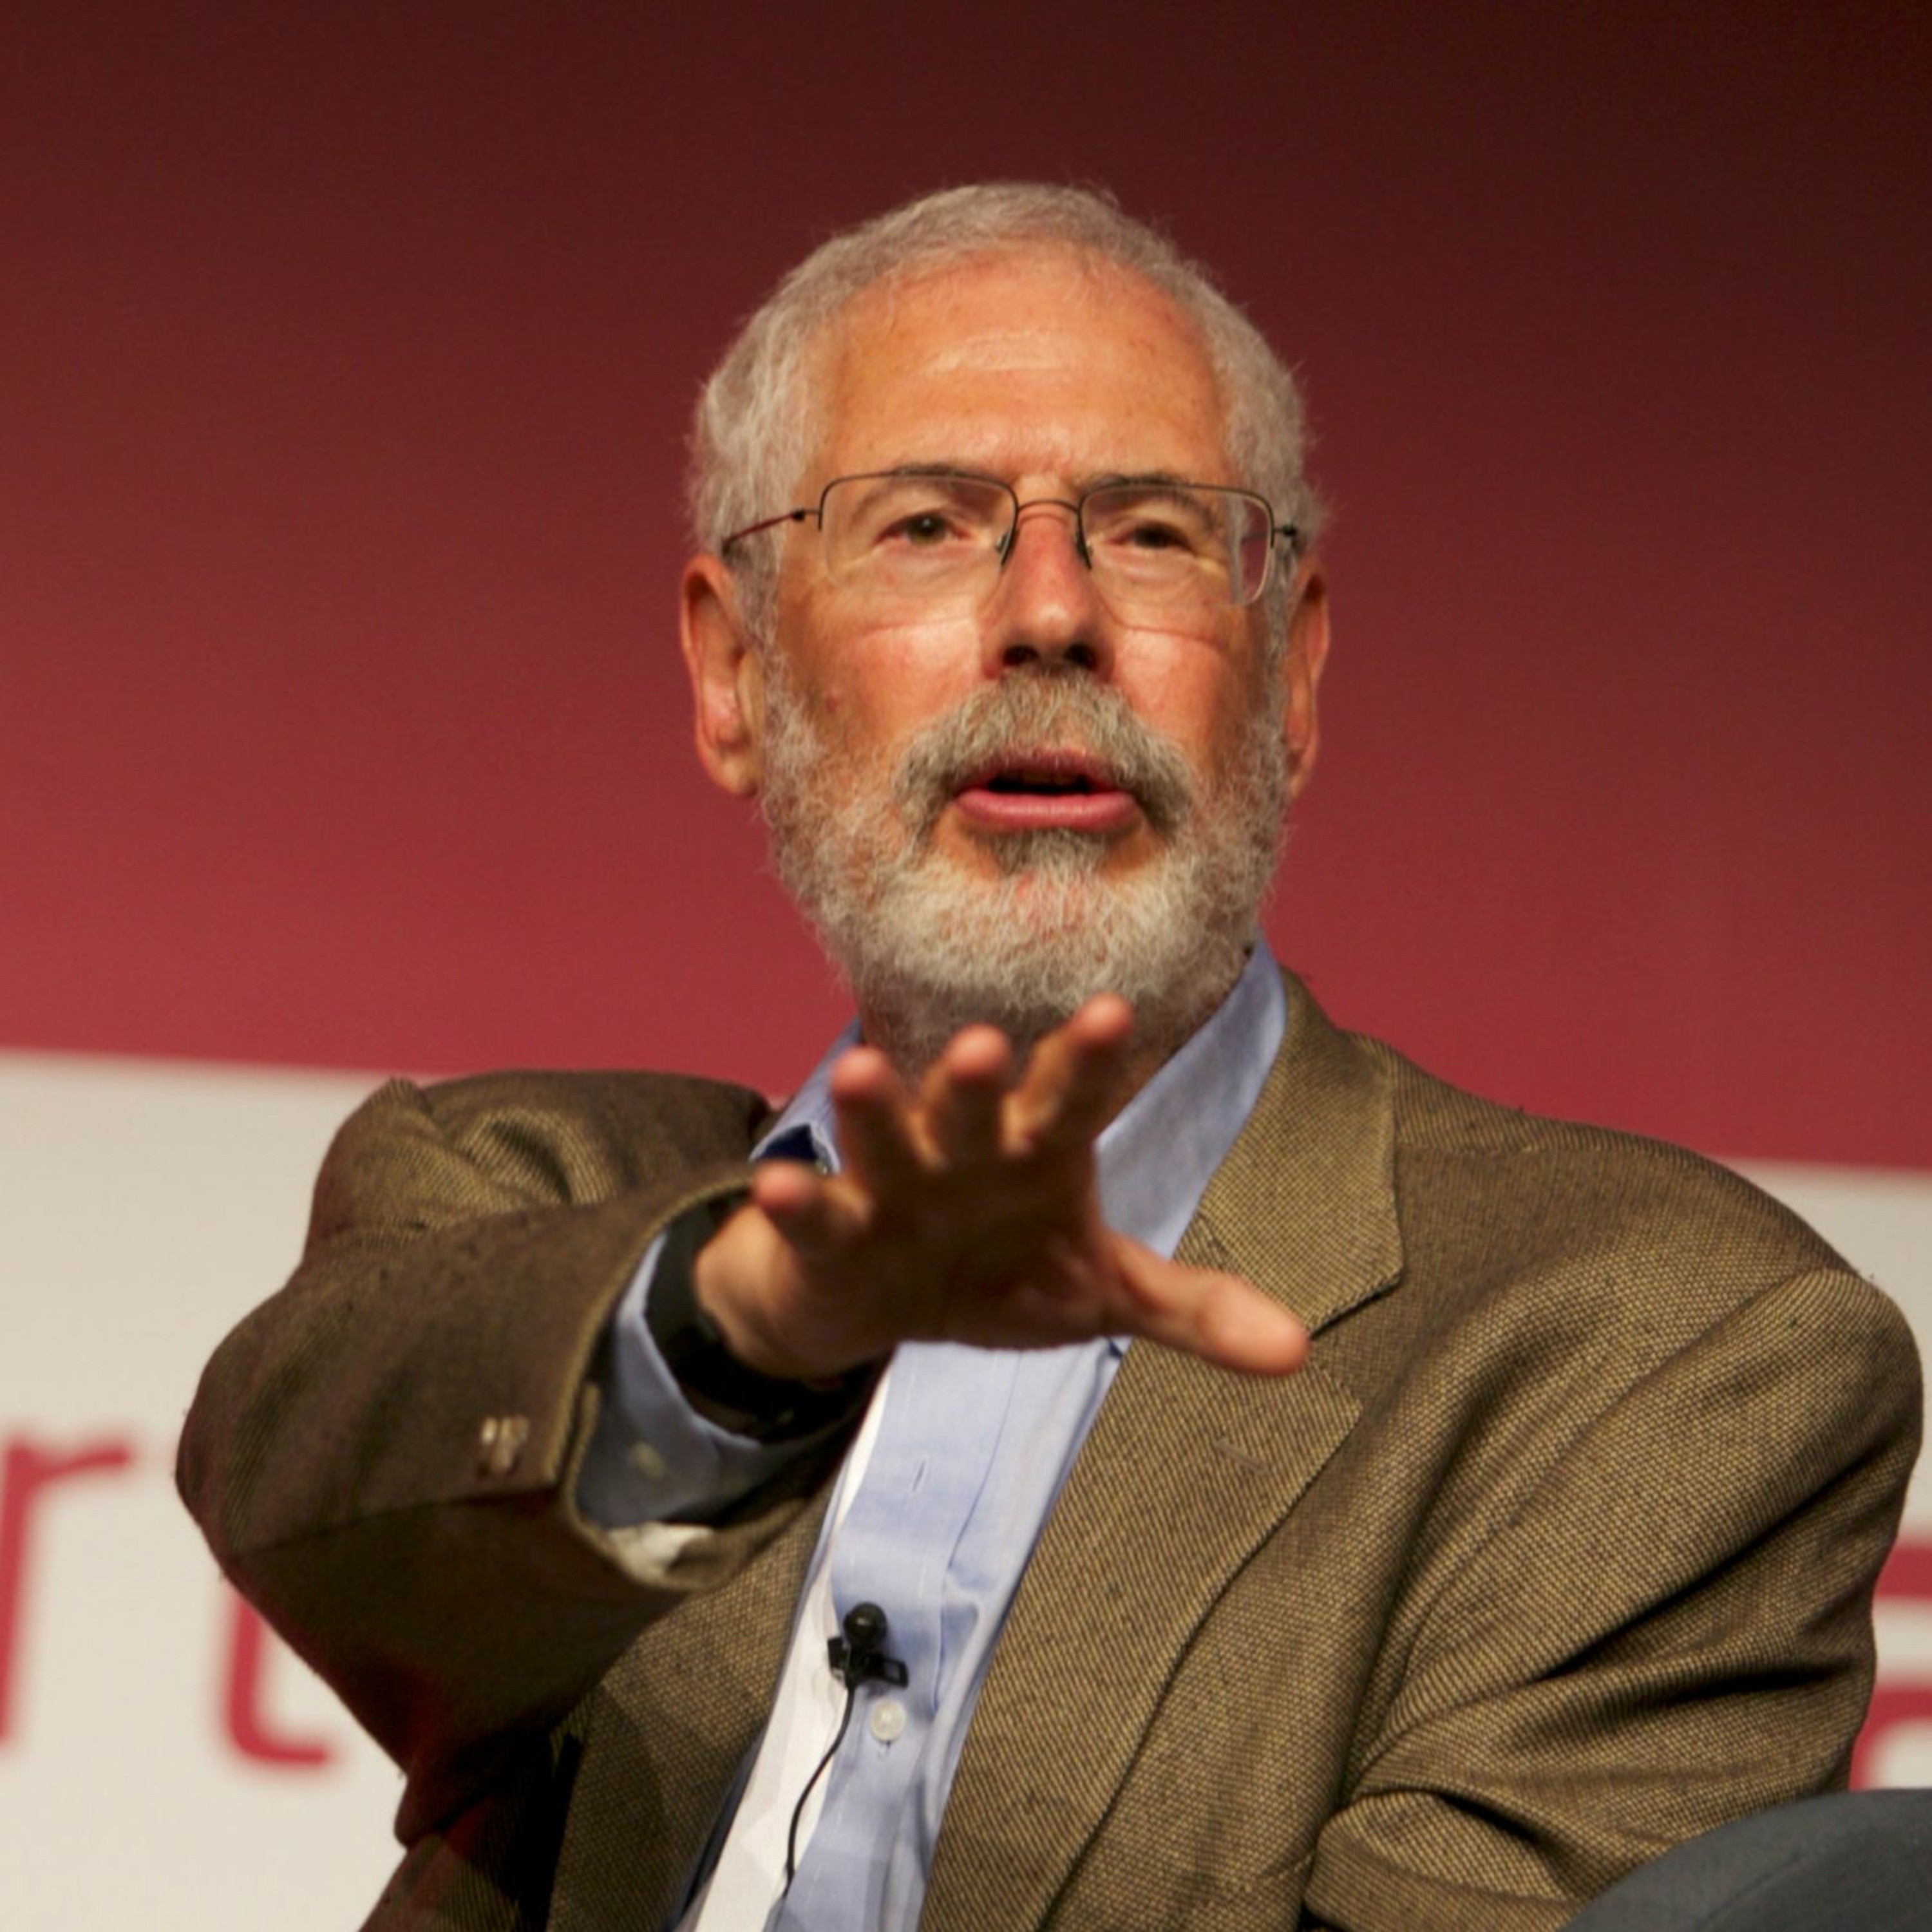 Steve Blank: Rethinking the Lean Startup (And What Comes Next)